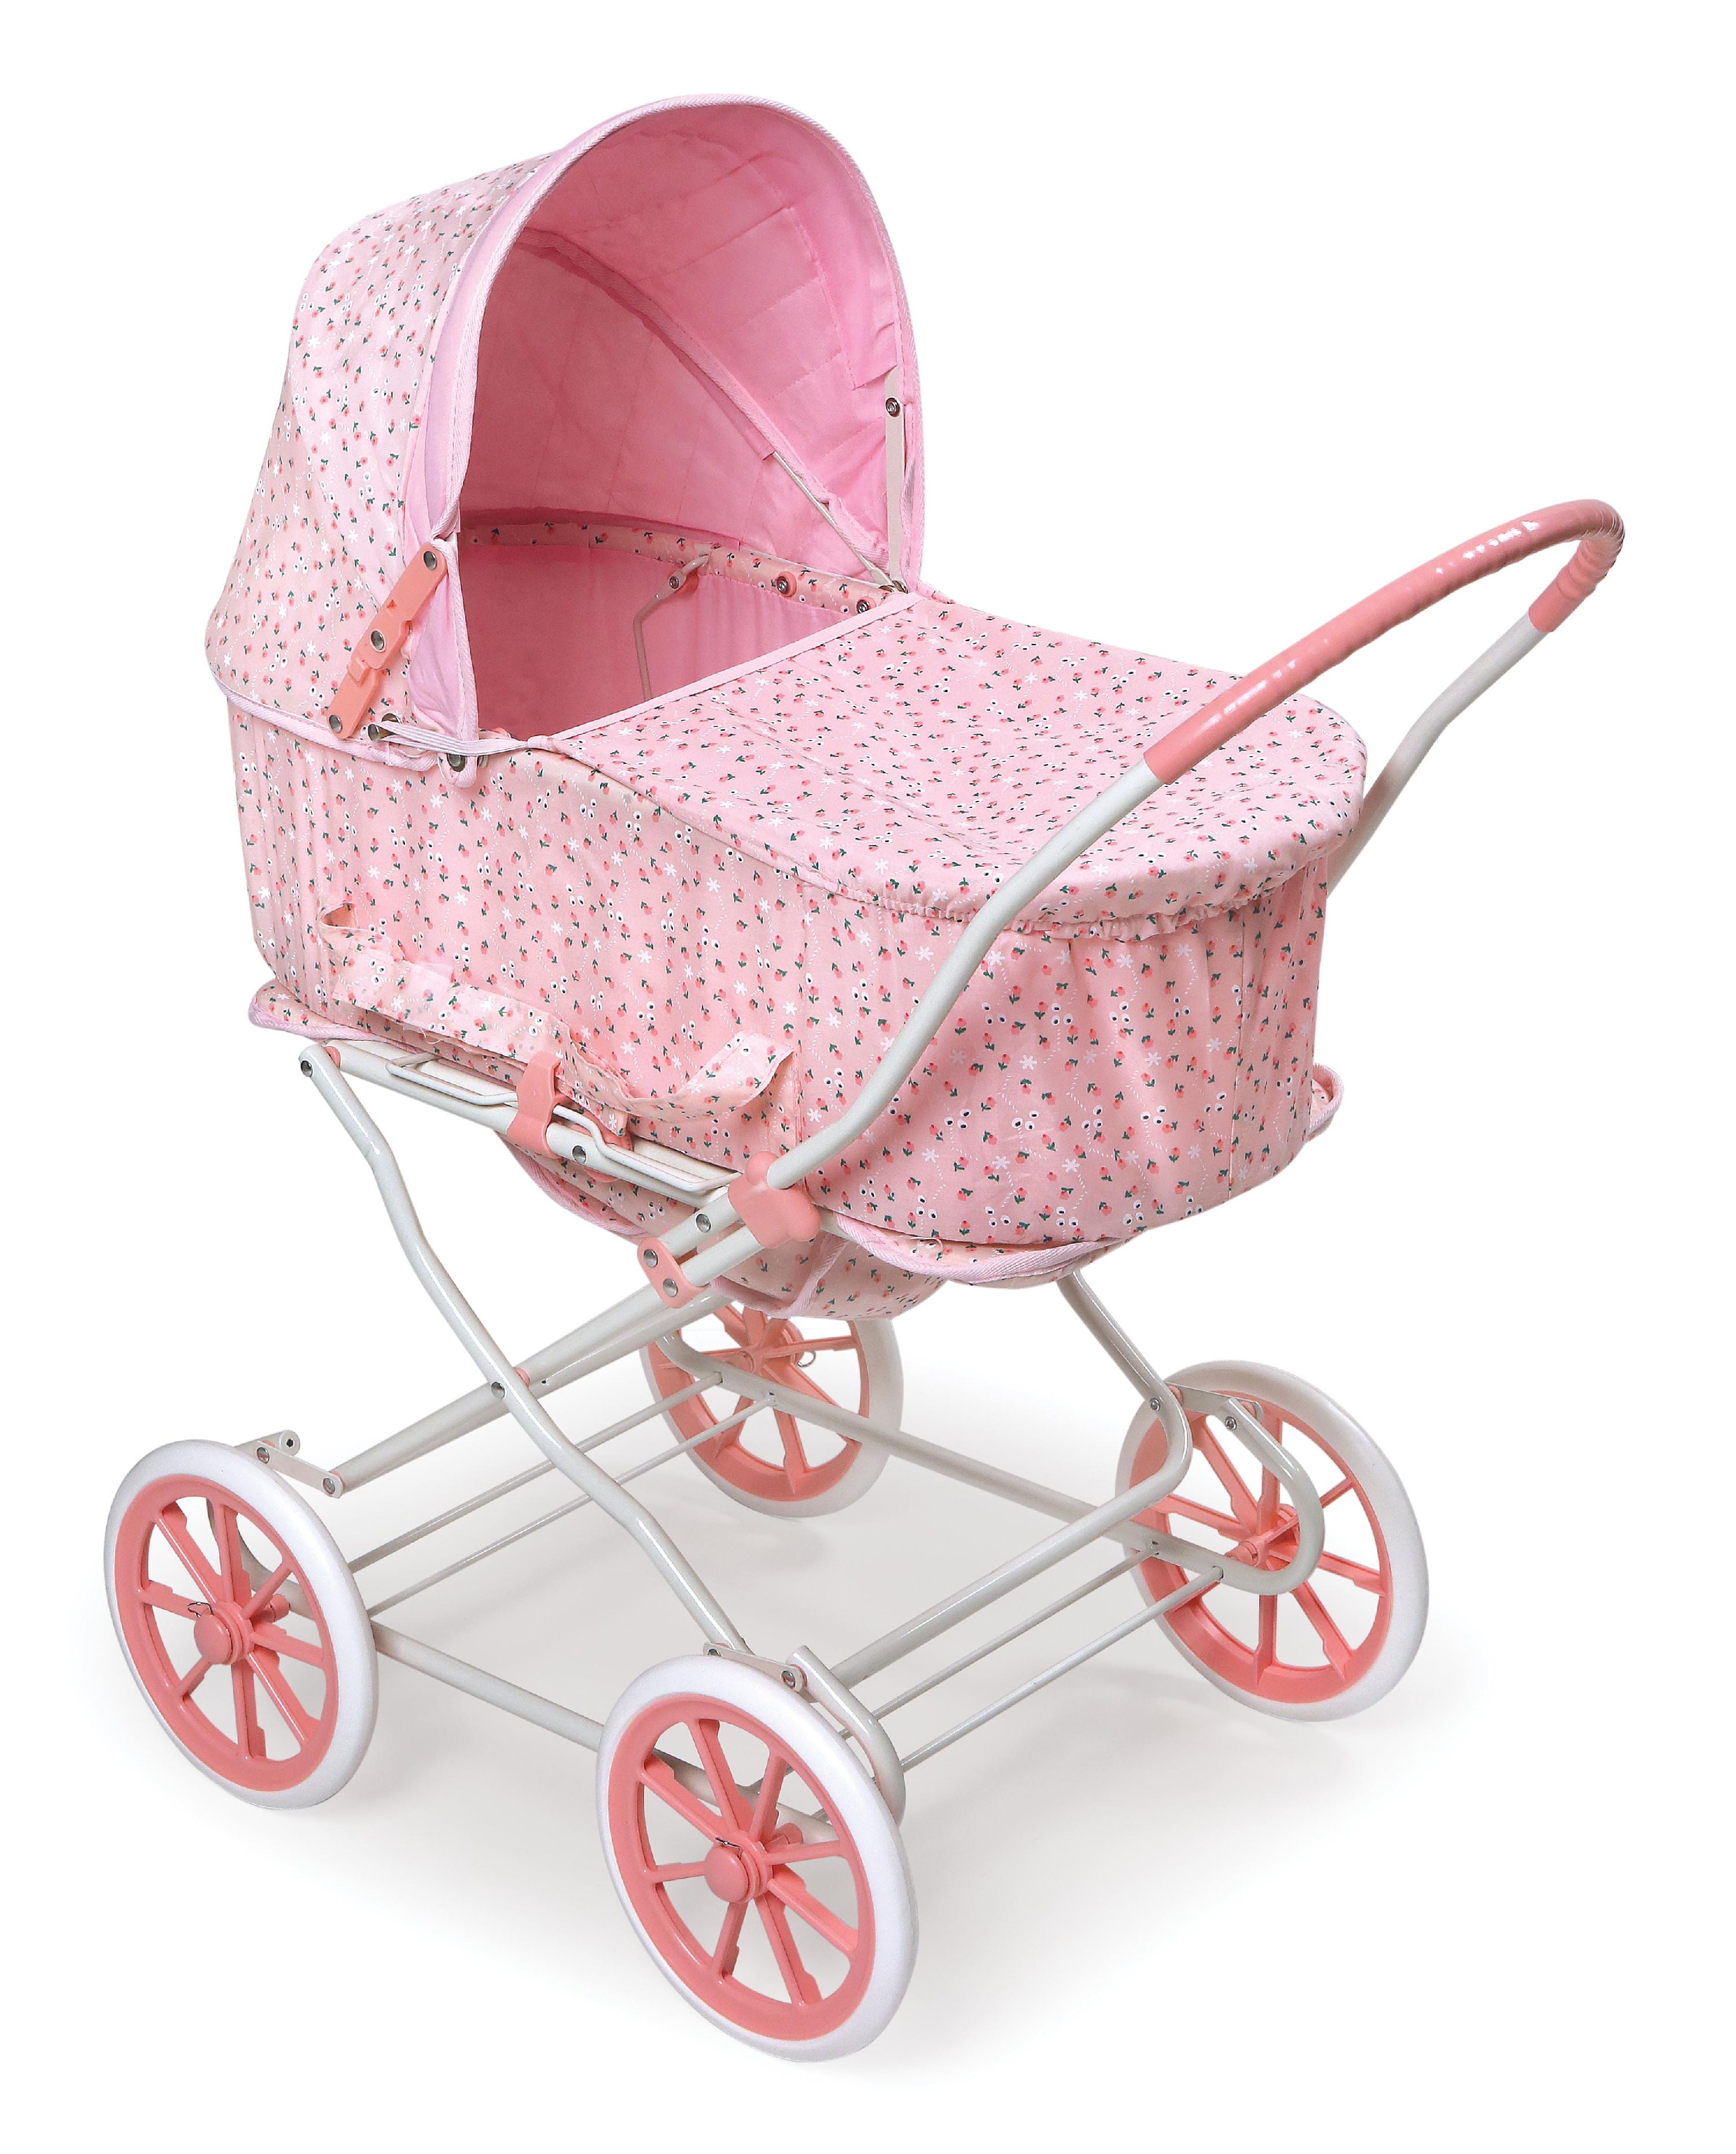 Pink Deluxe Metal Dolls Stroller Buggy Kids Folding Pushchair Toy for Ages 3+ 